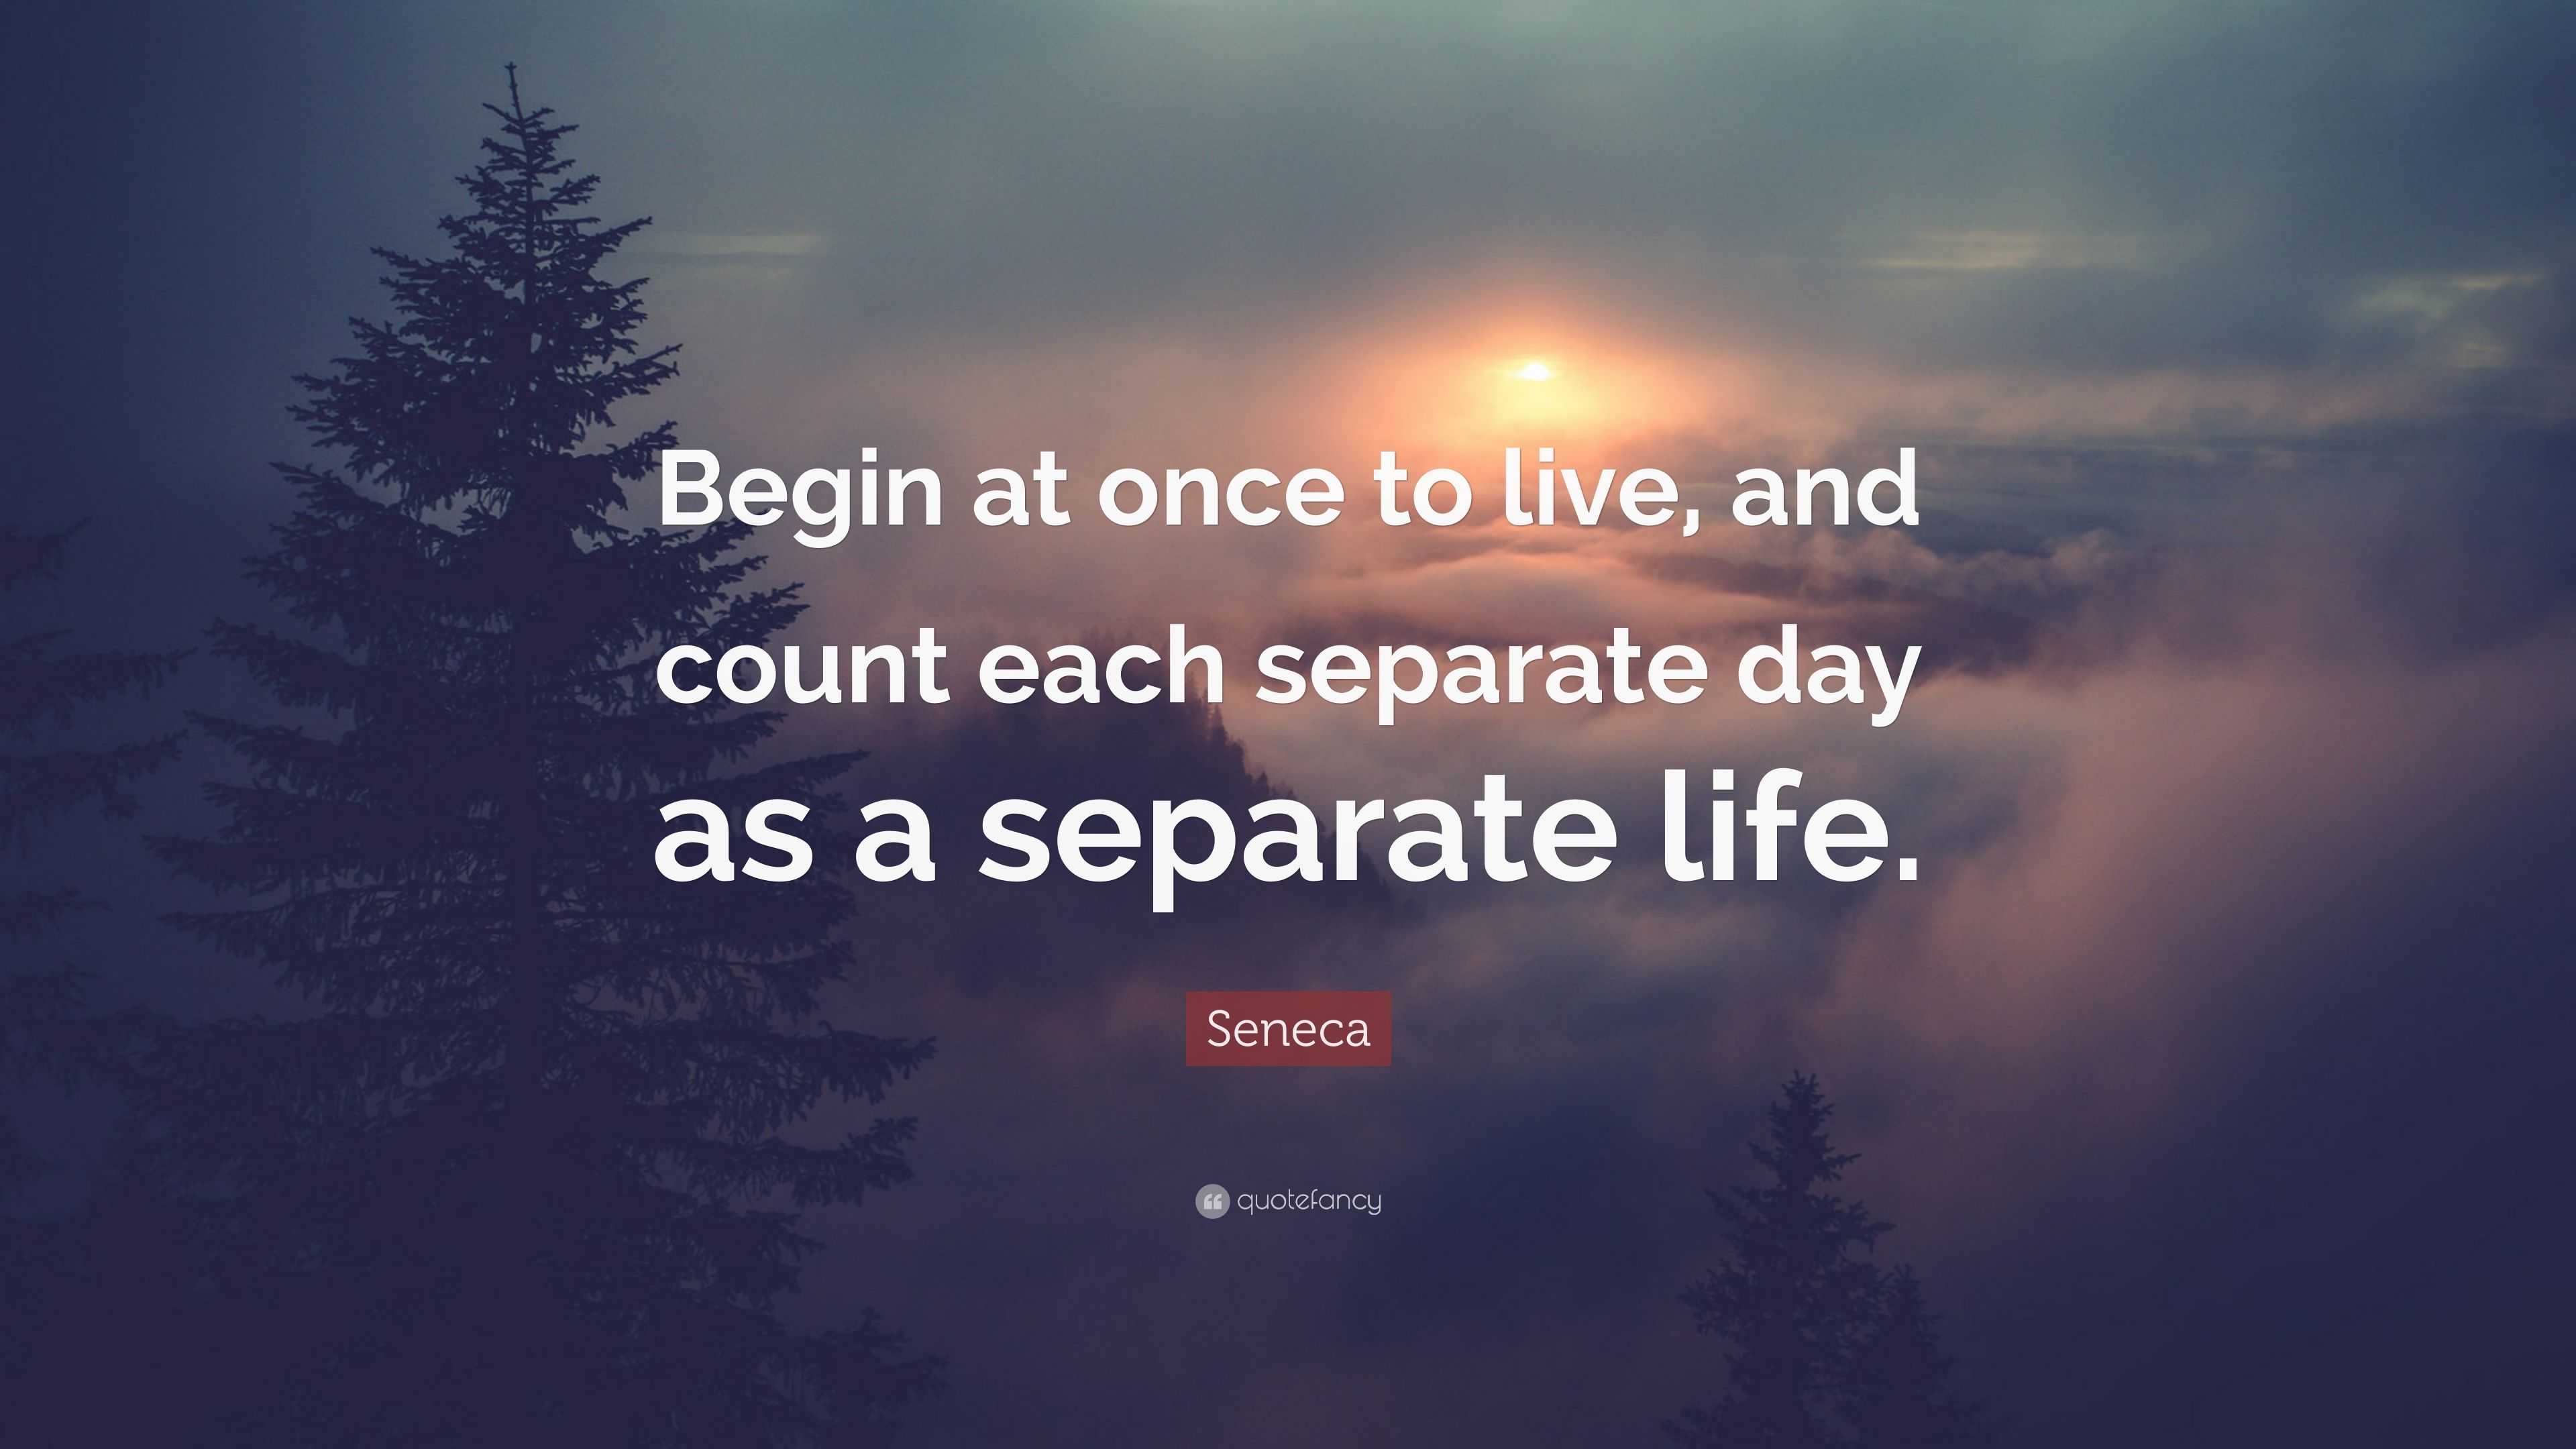 Seneca Quote: “Begin at once to live, and count each separate day as a